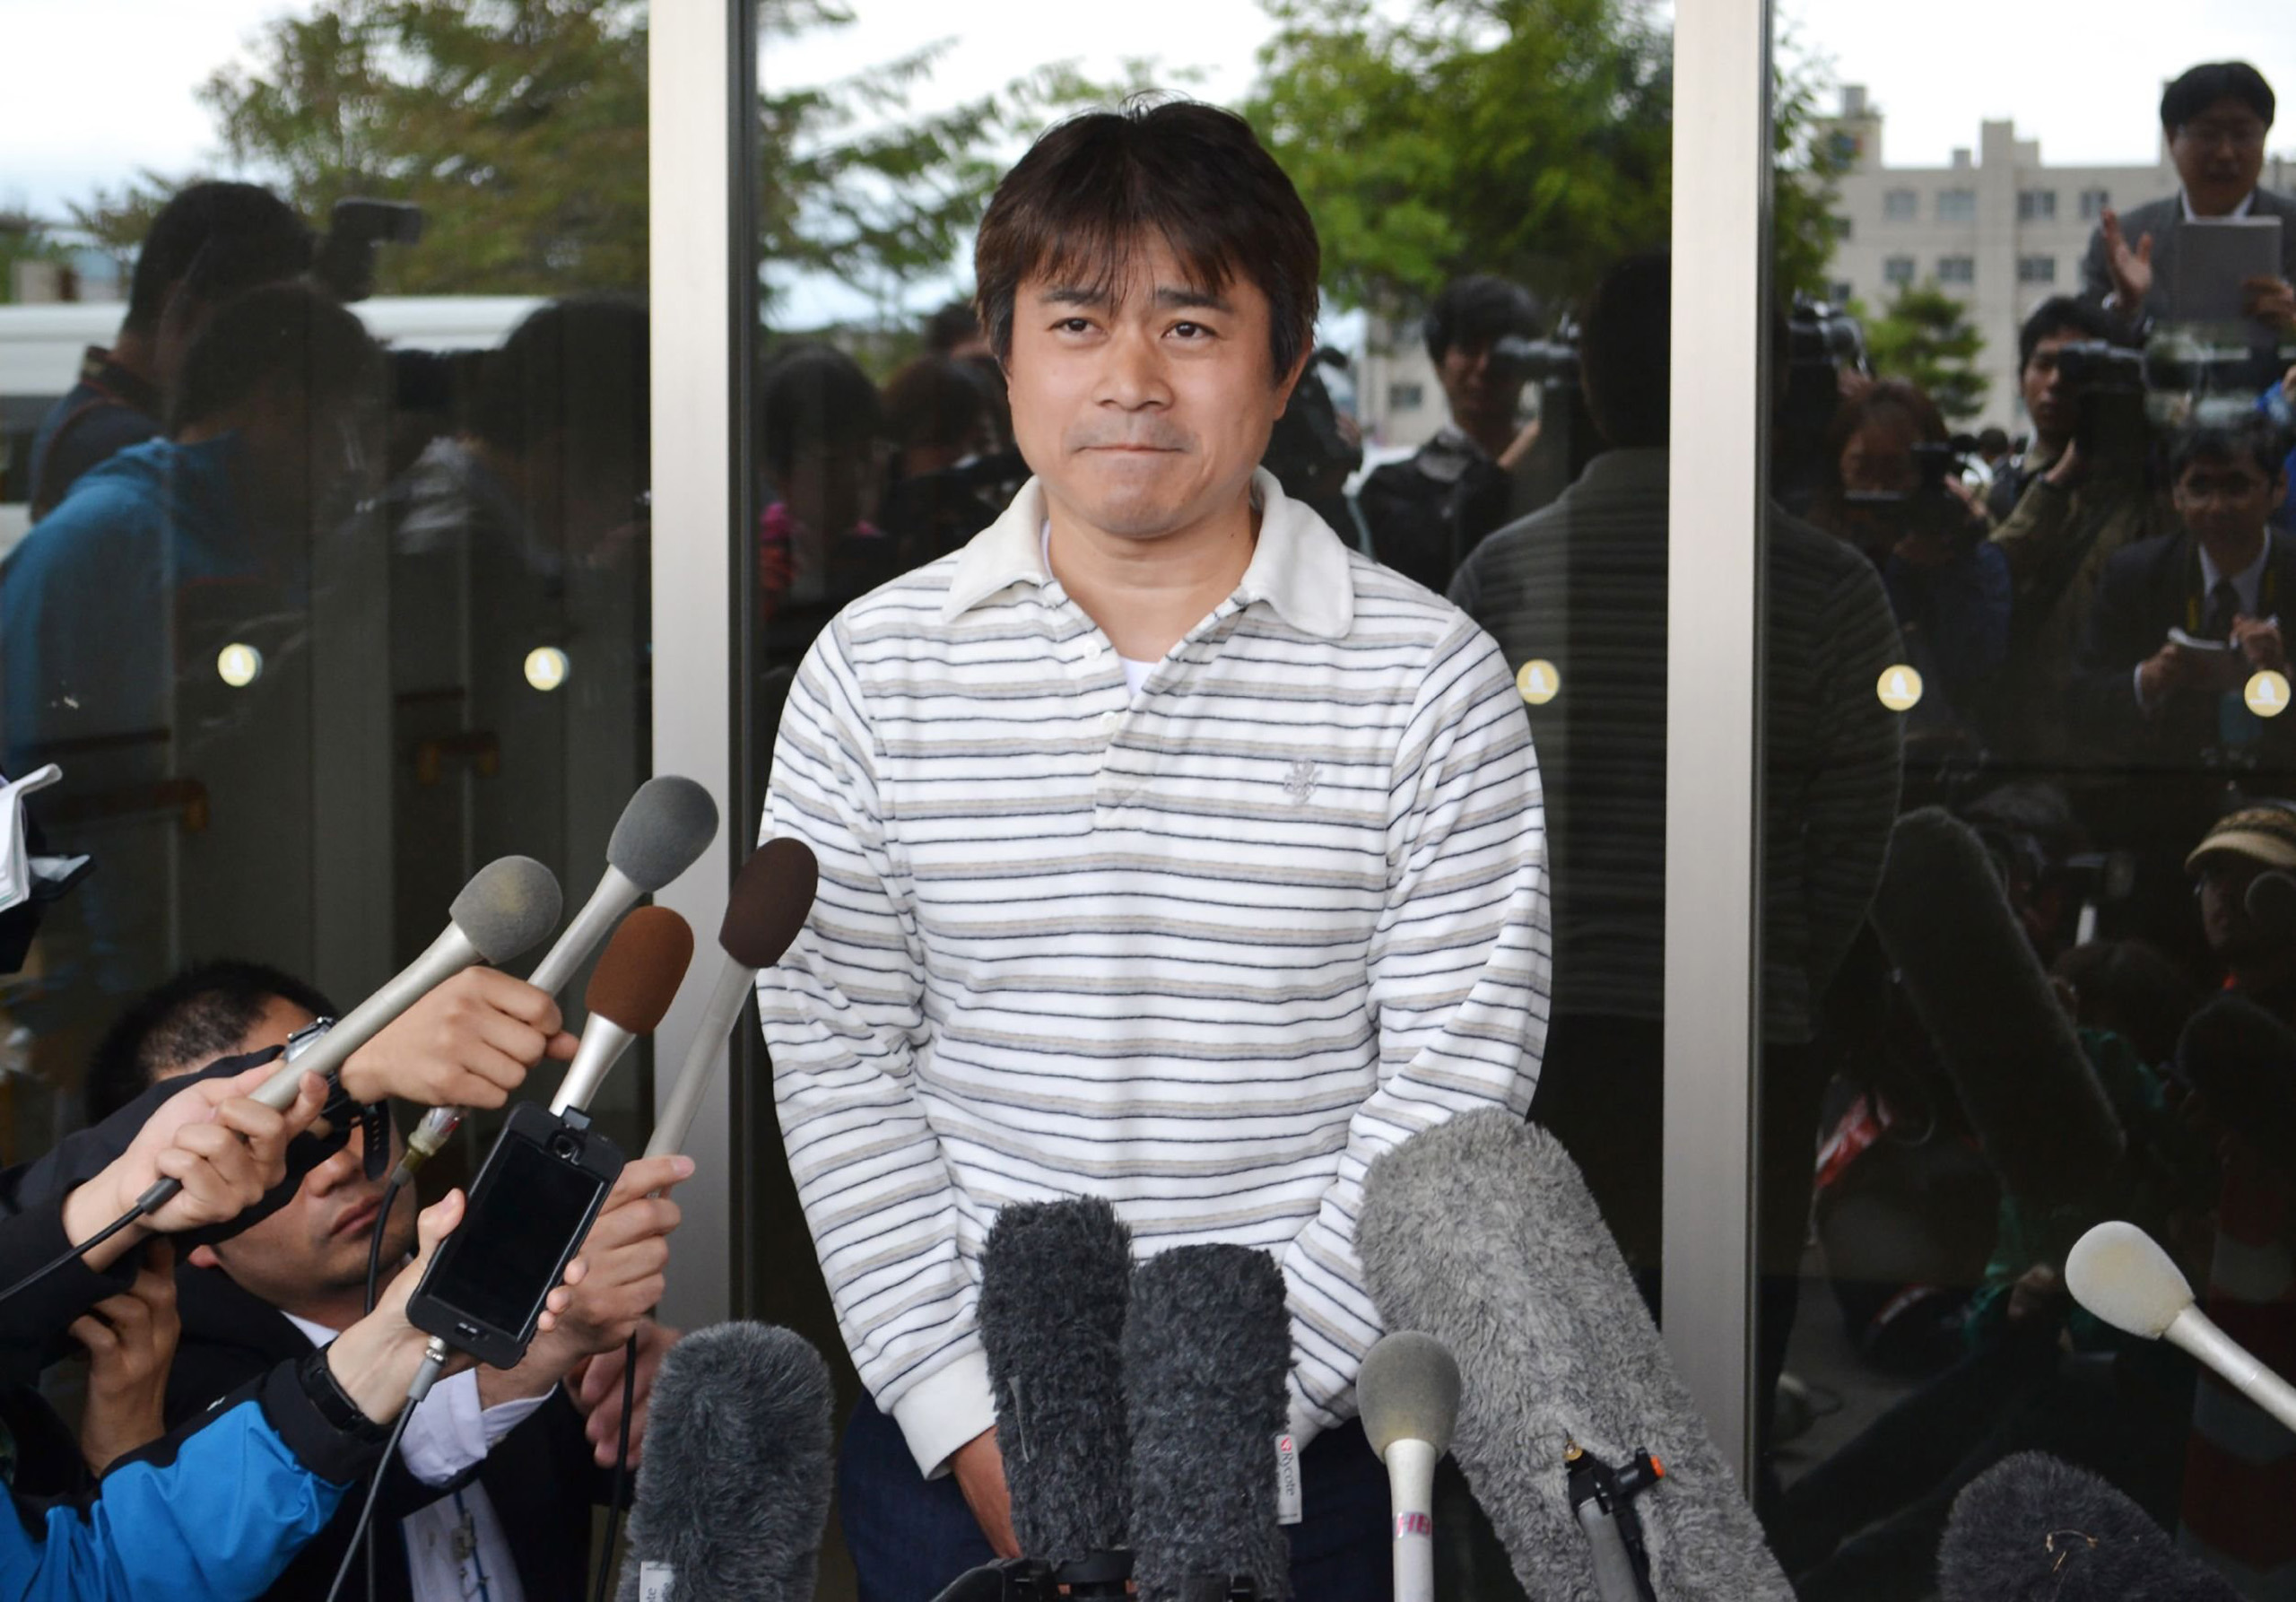 Father of Yamato Tanooka, a seven-year-old boy missing since being abandoned in a bear-inhabited forest in northern Japan, speaks to reporters in Hakodate on June 3, 2016. (JIJI Press—AFP/Getty Images)